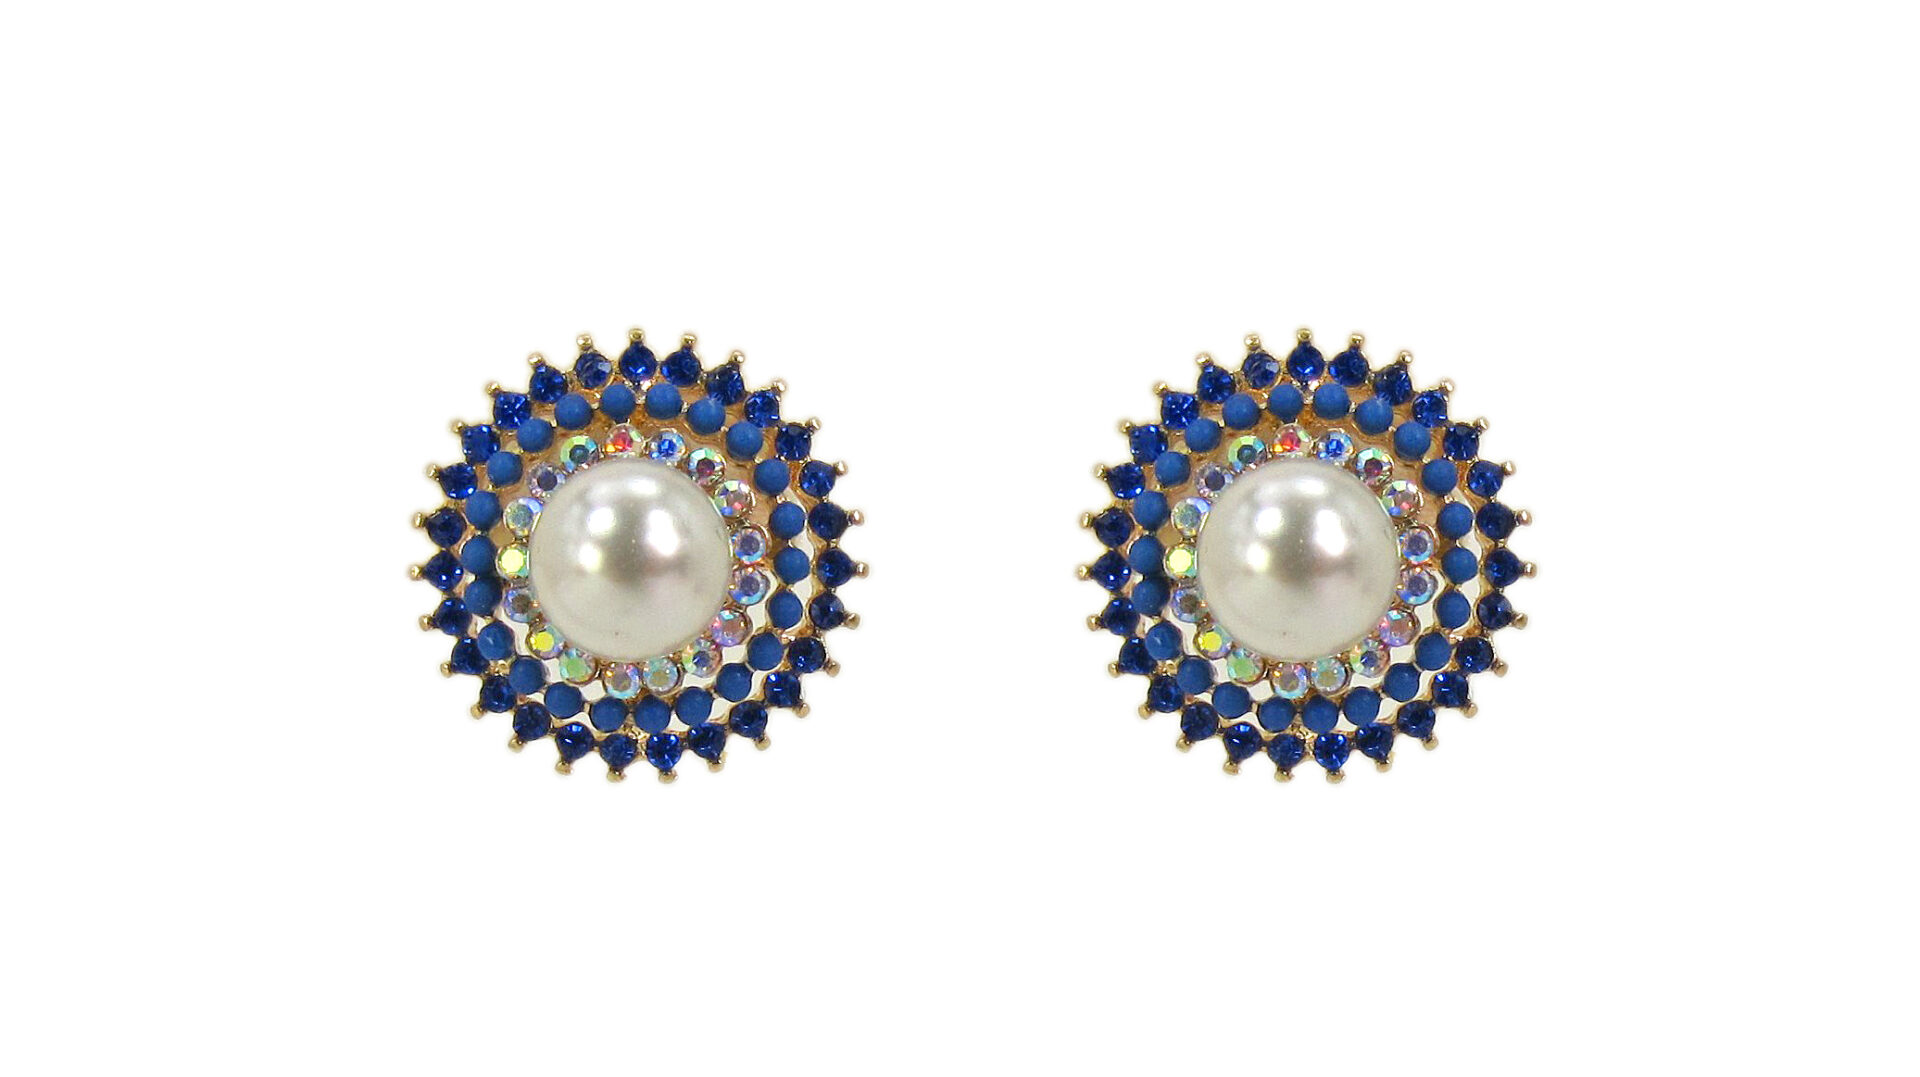 White Pearl and Blue Crystal Studded Earrings